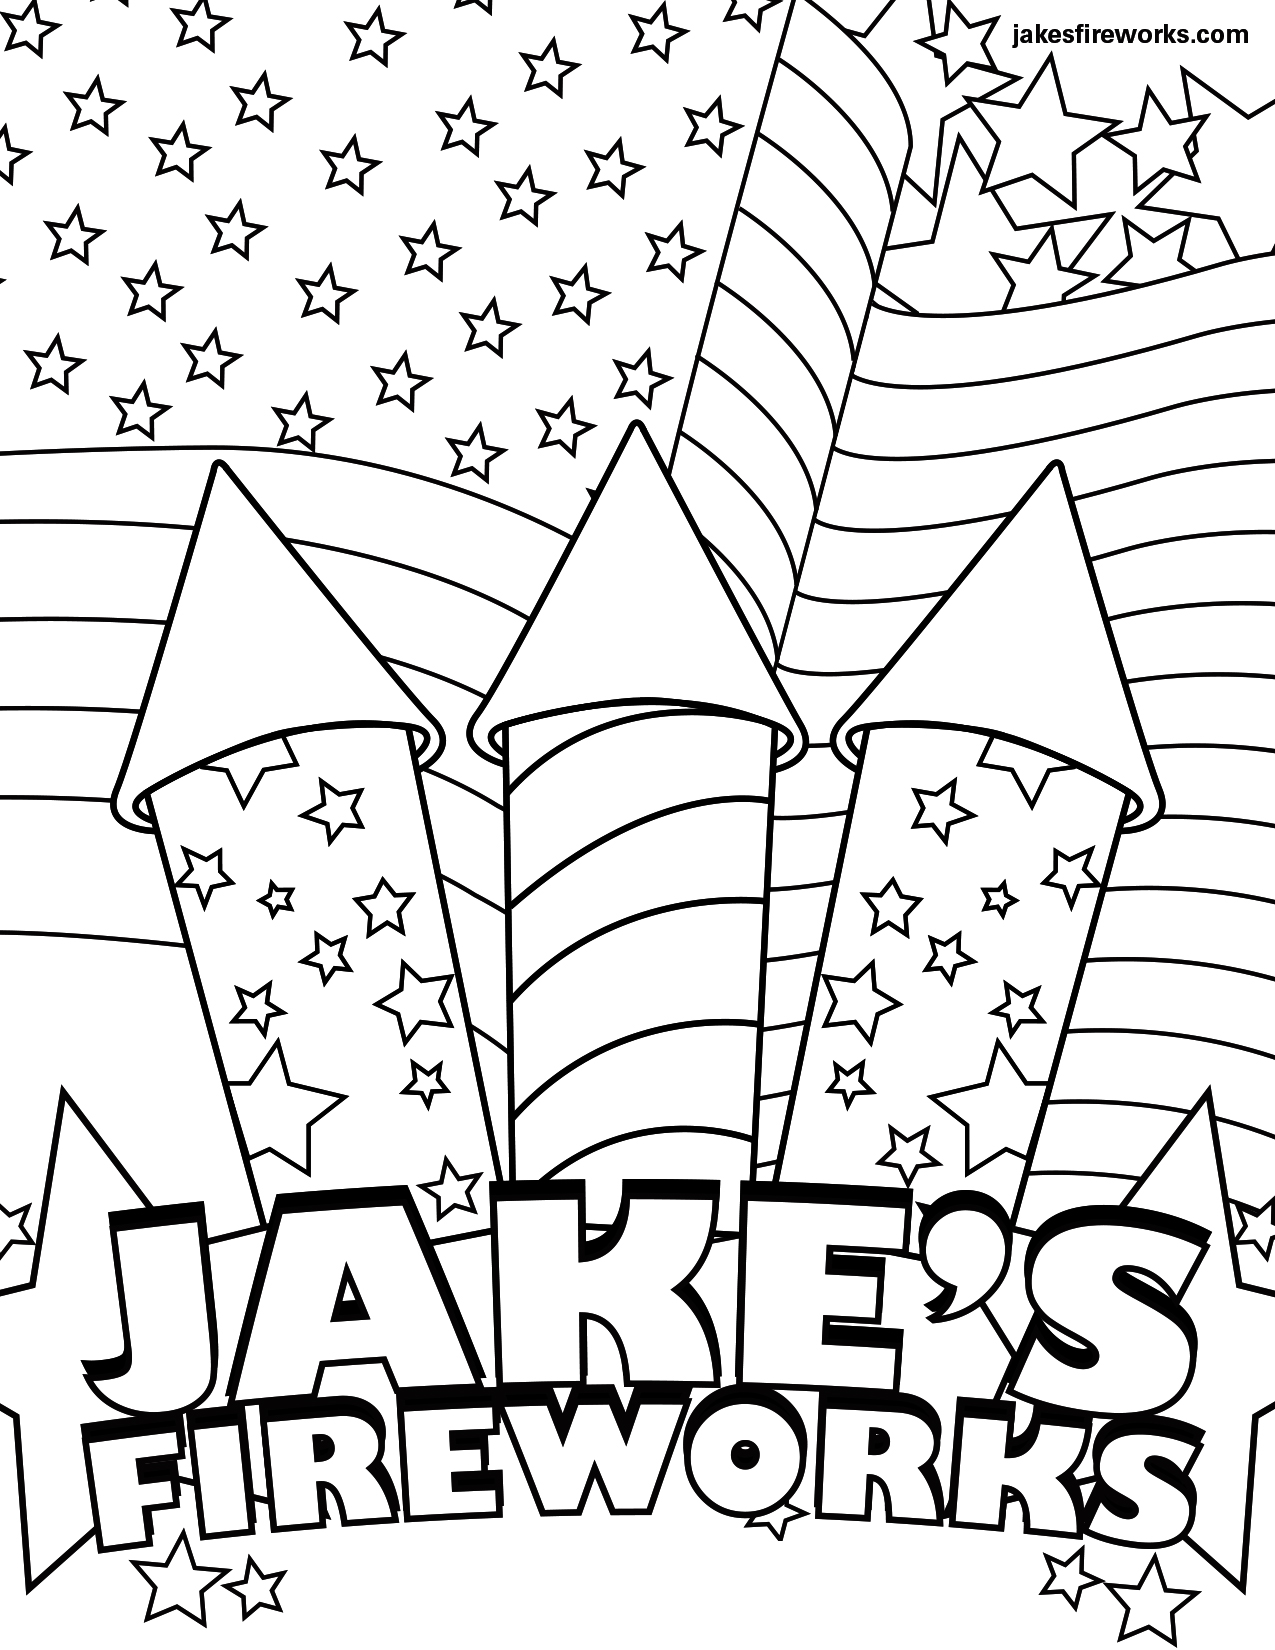 Free Printable Fireworks Coloring Pages For Kids